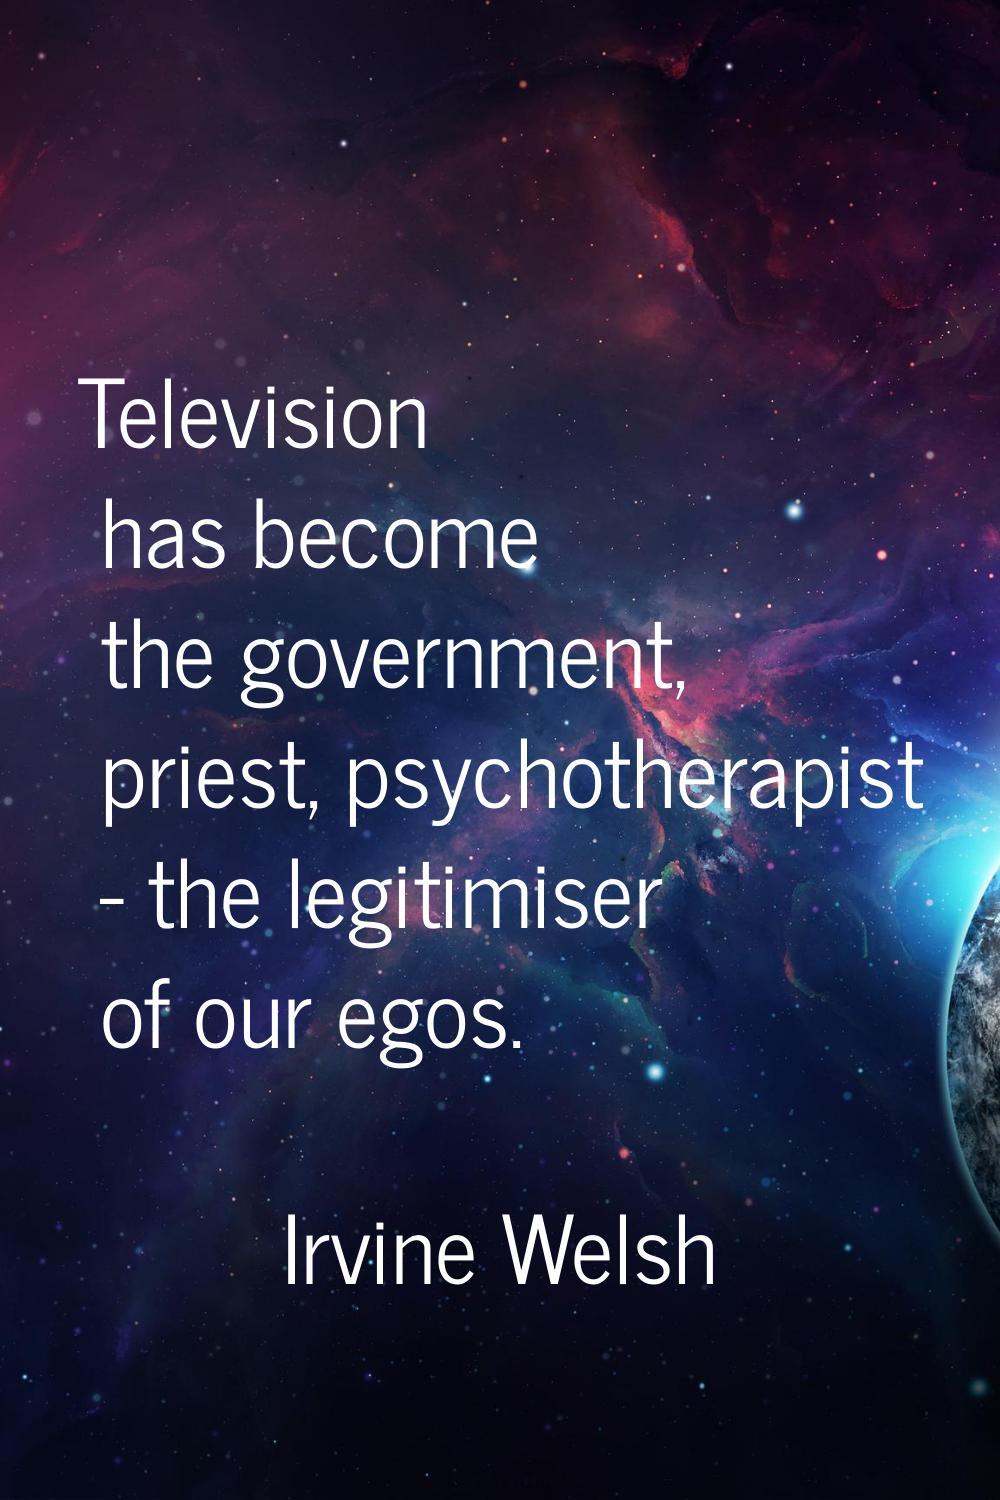 Television has become the government, priest, psychotherapist - the legitimiser of our egos.